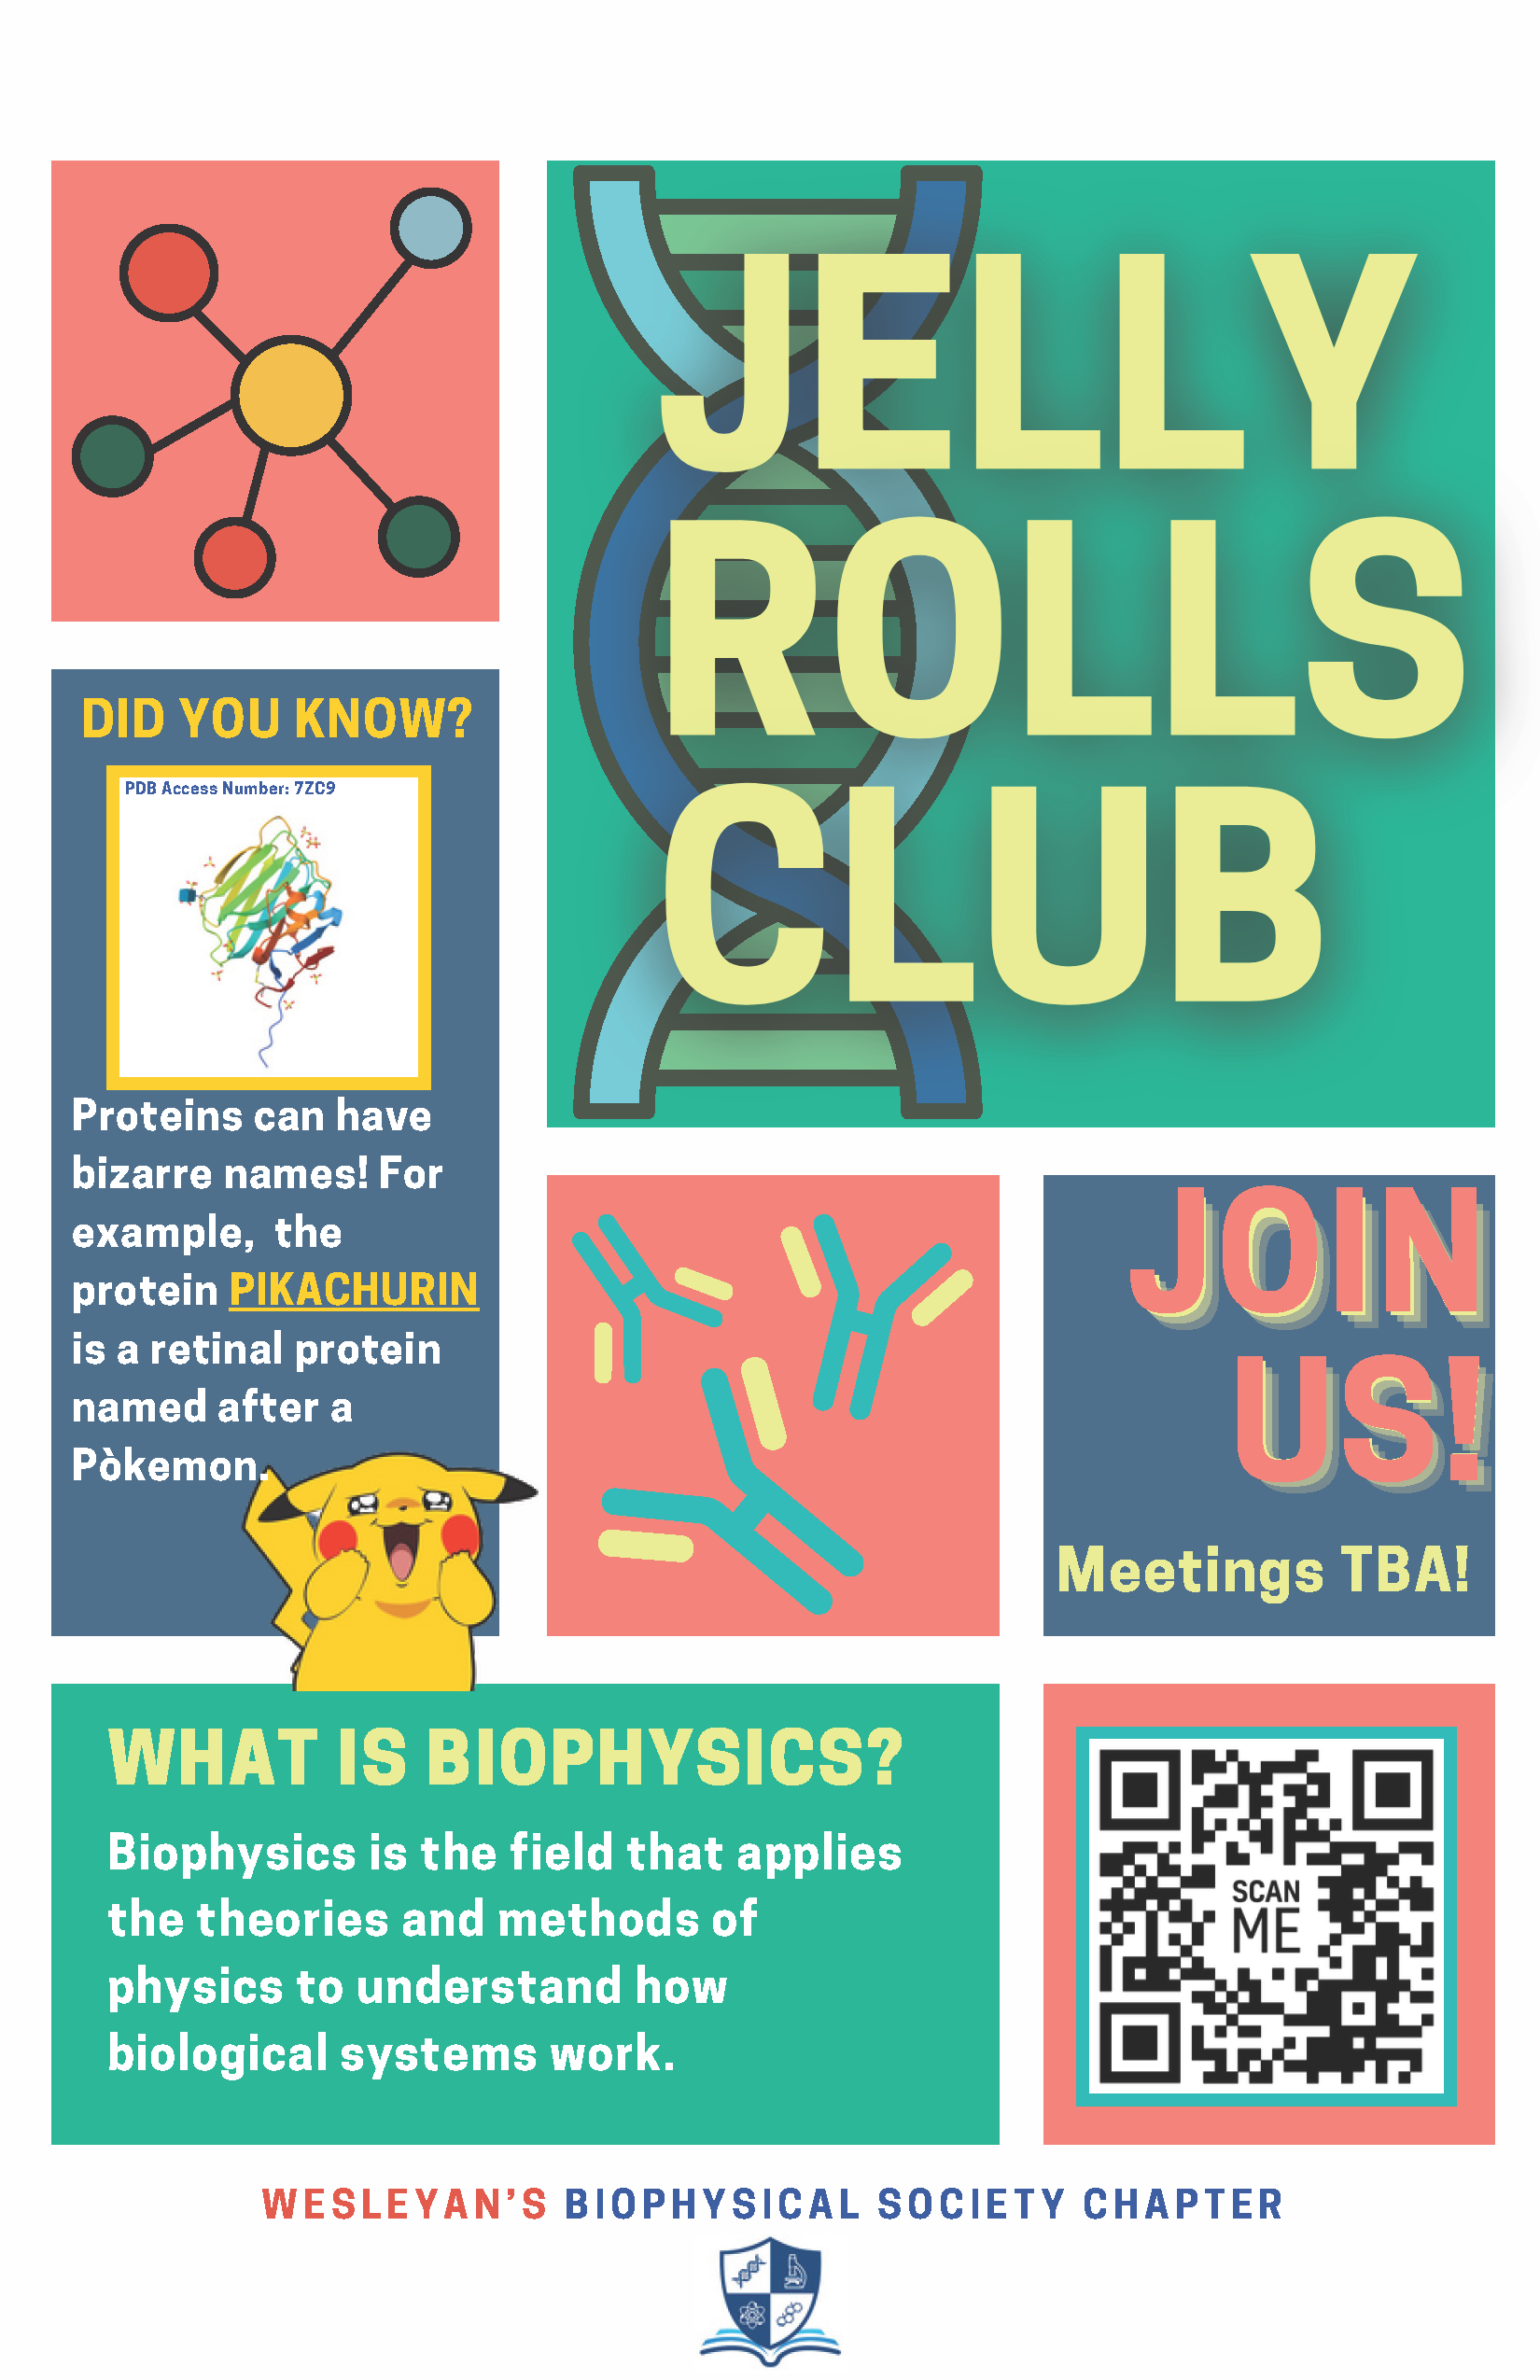 Image Text: The Jelly Rolls Club, Wesleyan's Biophysical Society chapter. Join us! Meetings TBA! Did you know, proteins can have bizarre names! For example, the protein pikachurin is a retinal protein named after a Pokemon. What is biophysics? Biophysics is the field that applies the theories and methods of physics to understand how biological systems work.